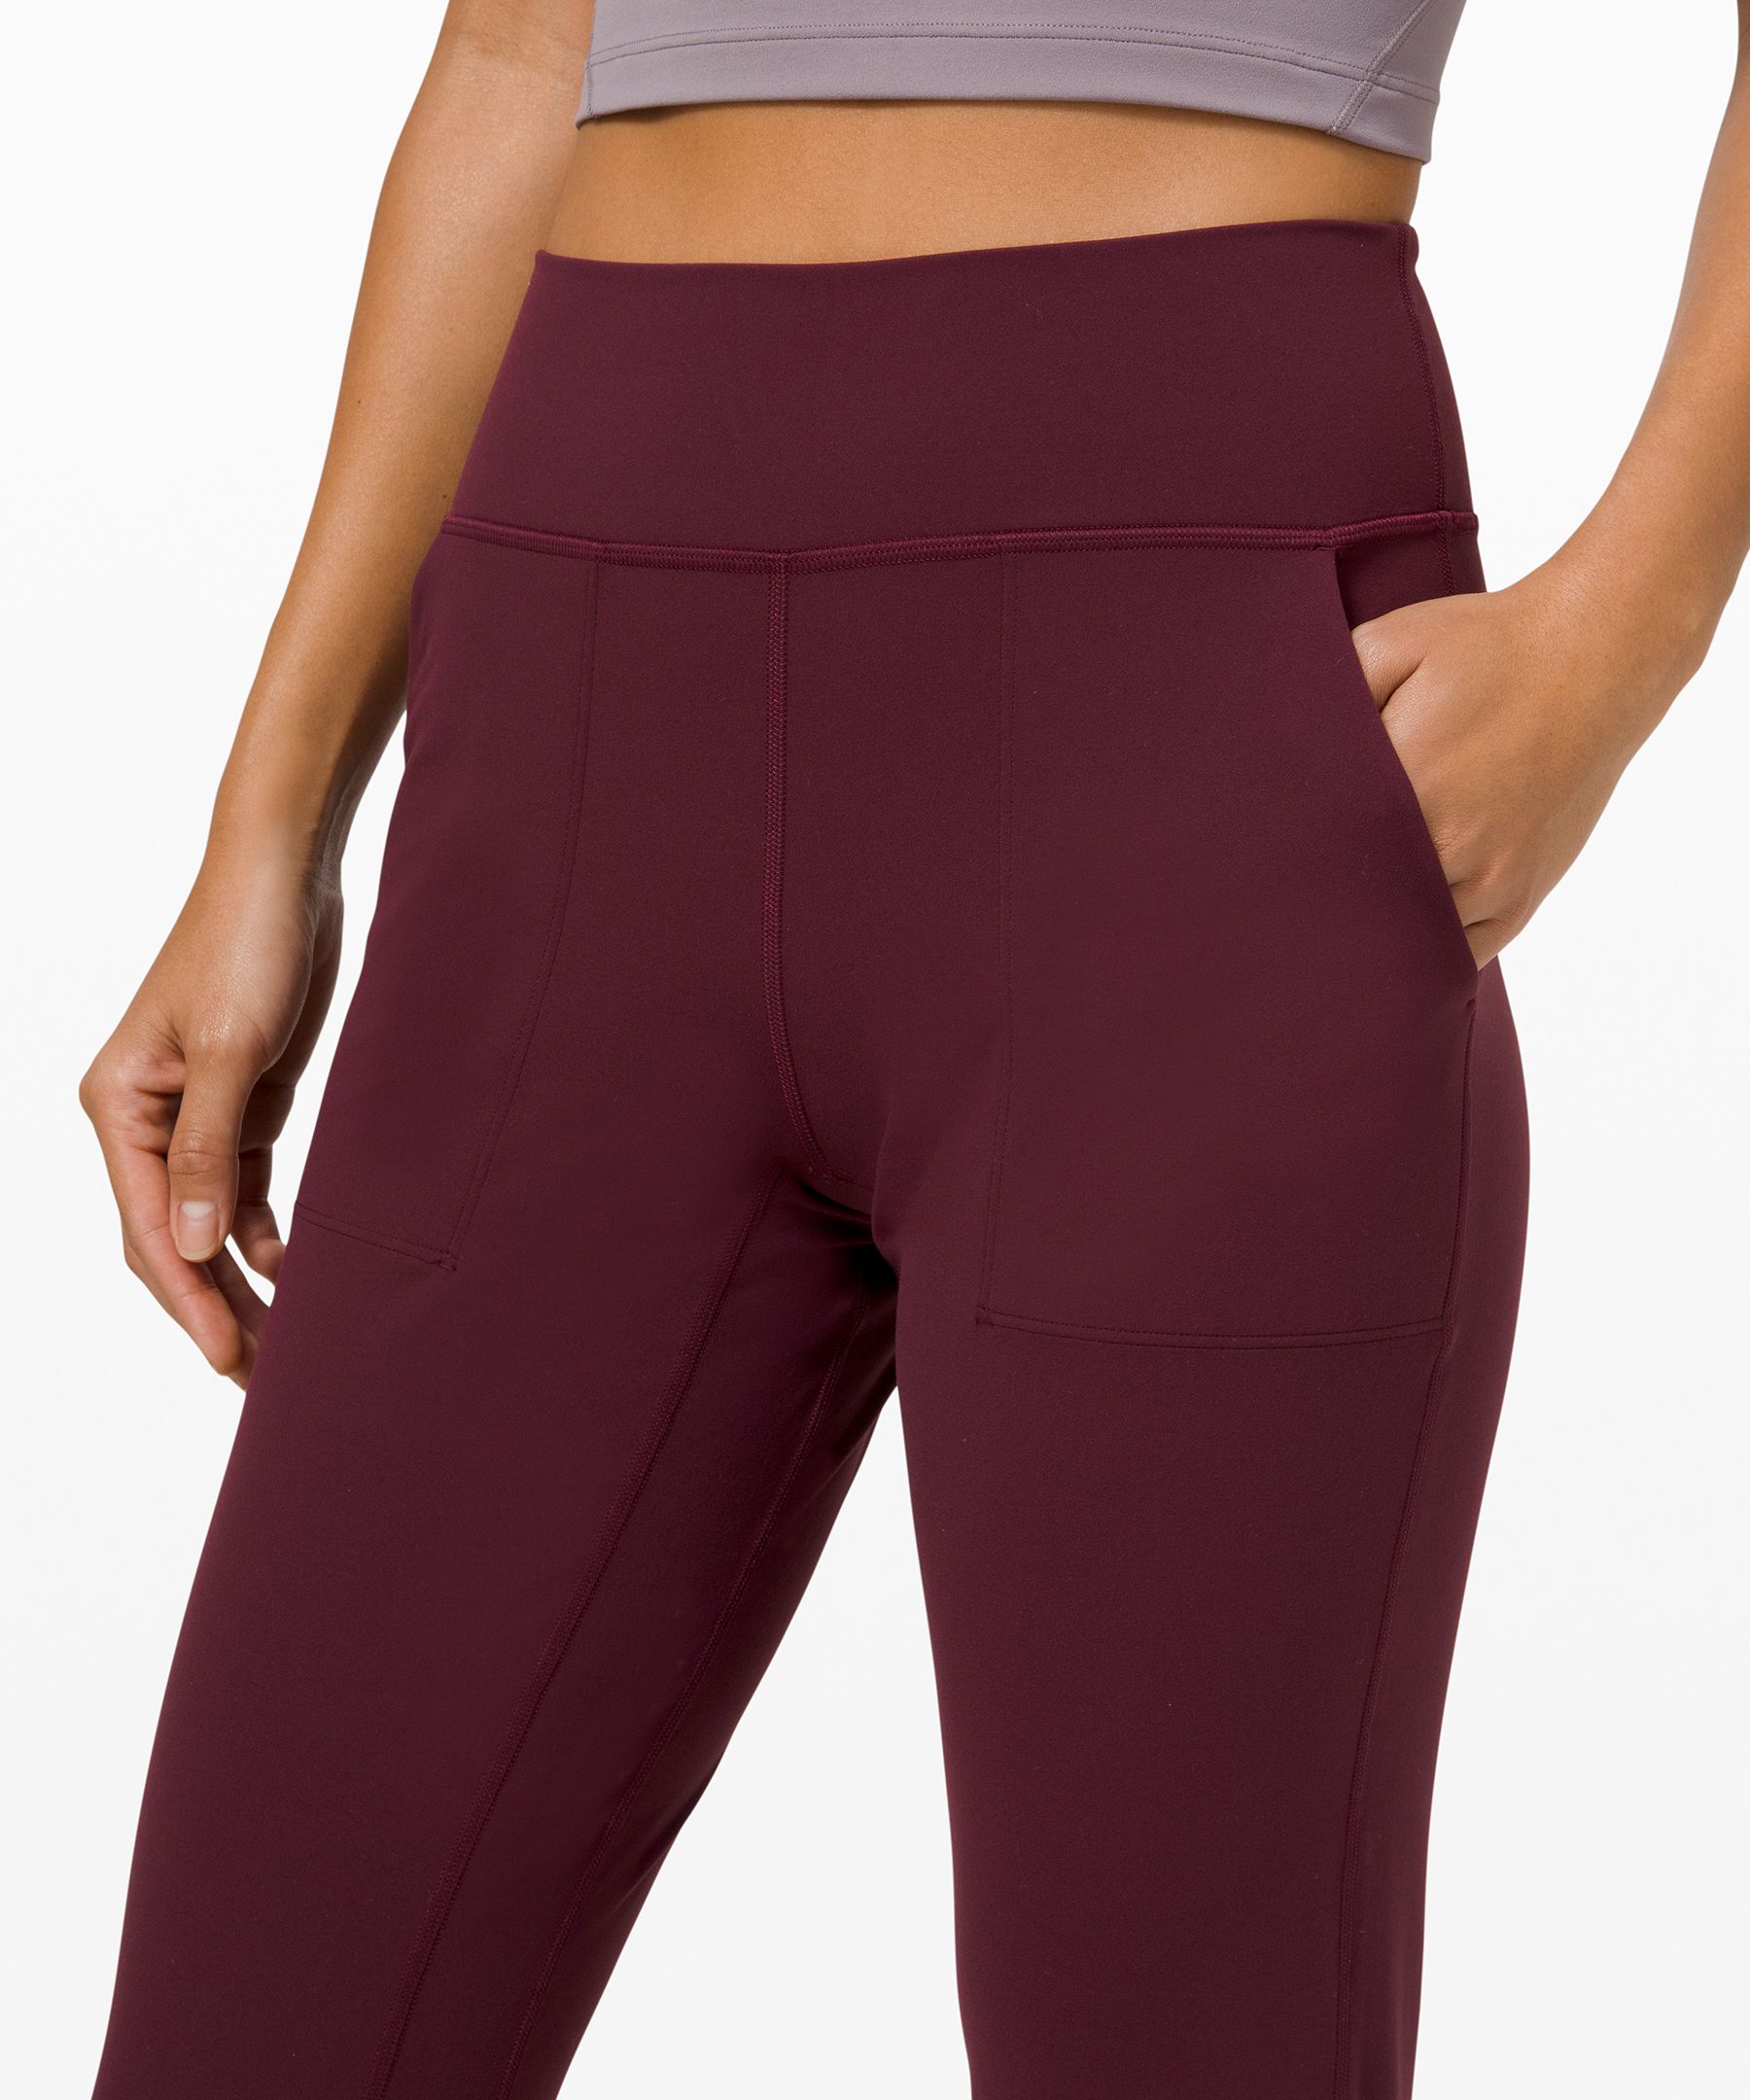 Lululemon Align Joggers Black Size 4 - $75 (36% Off Retail) - From